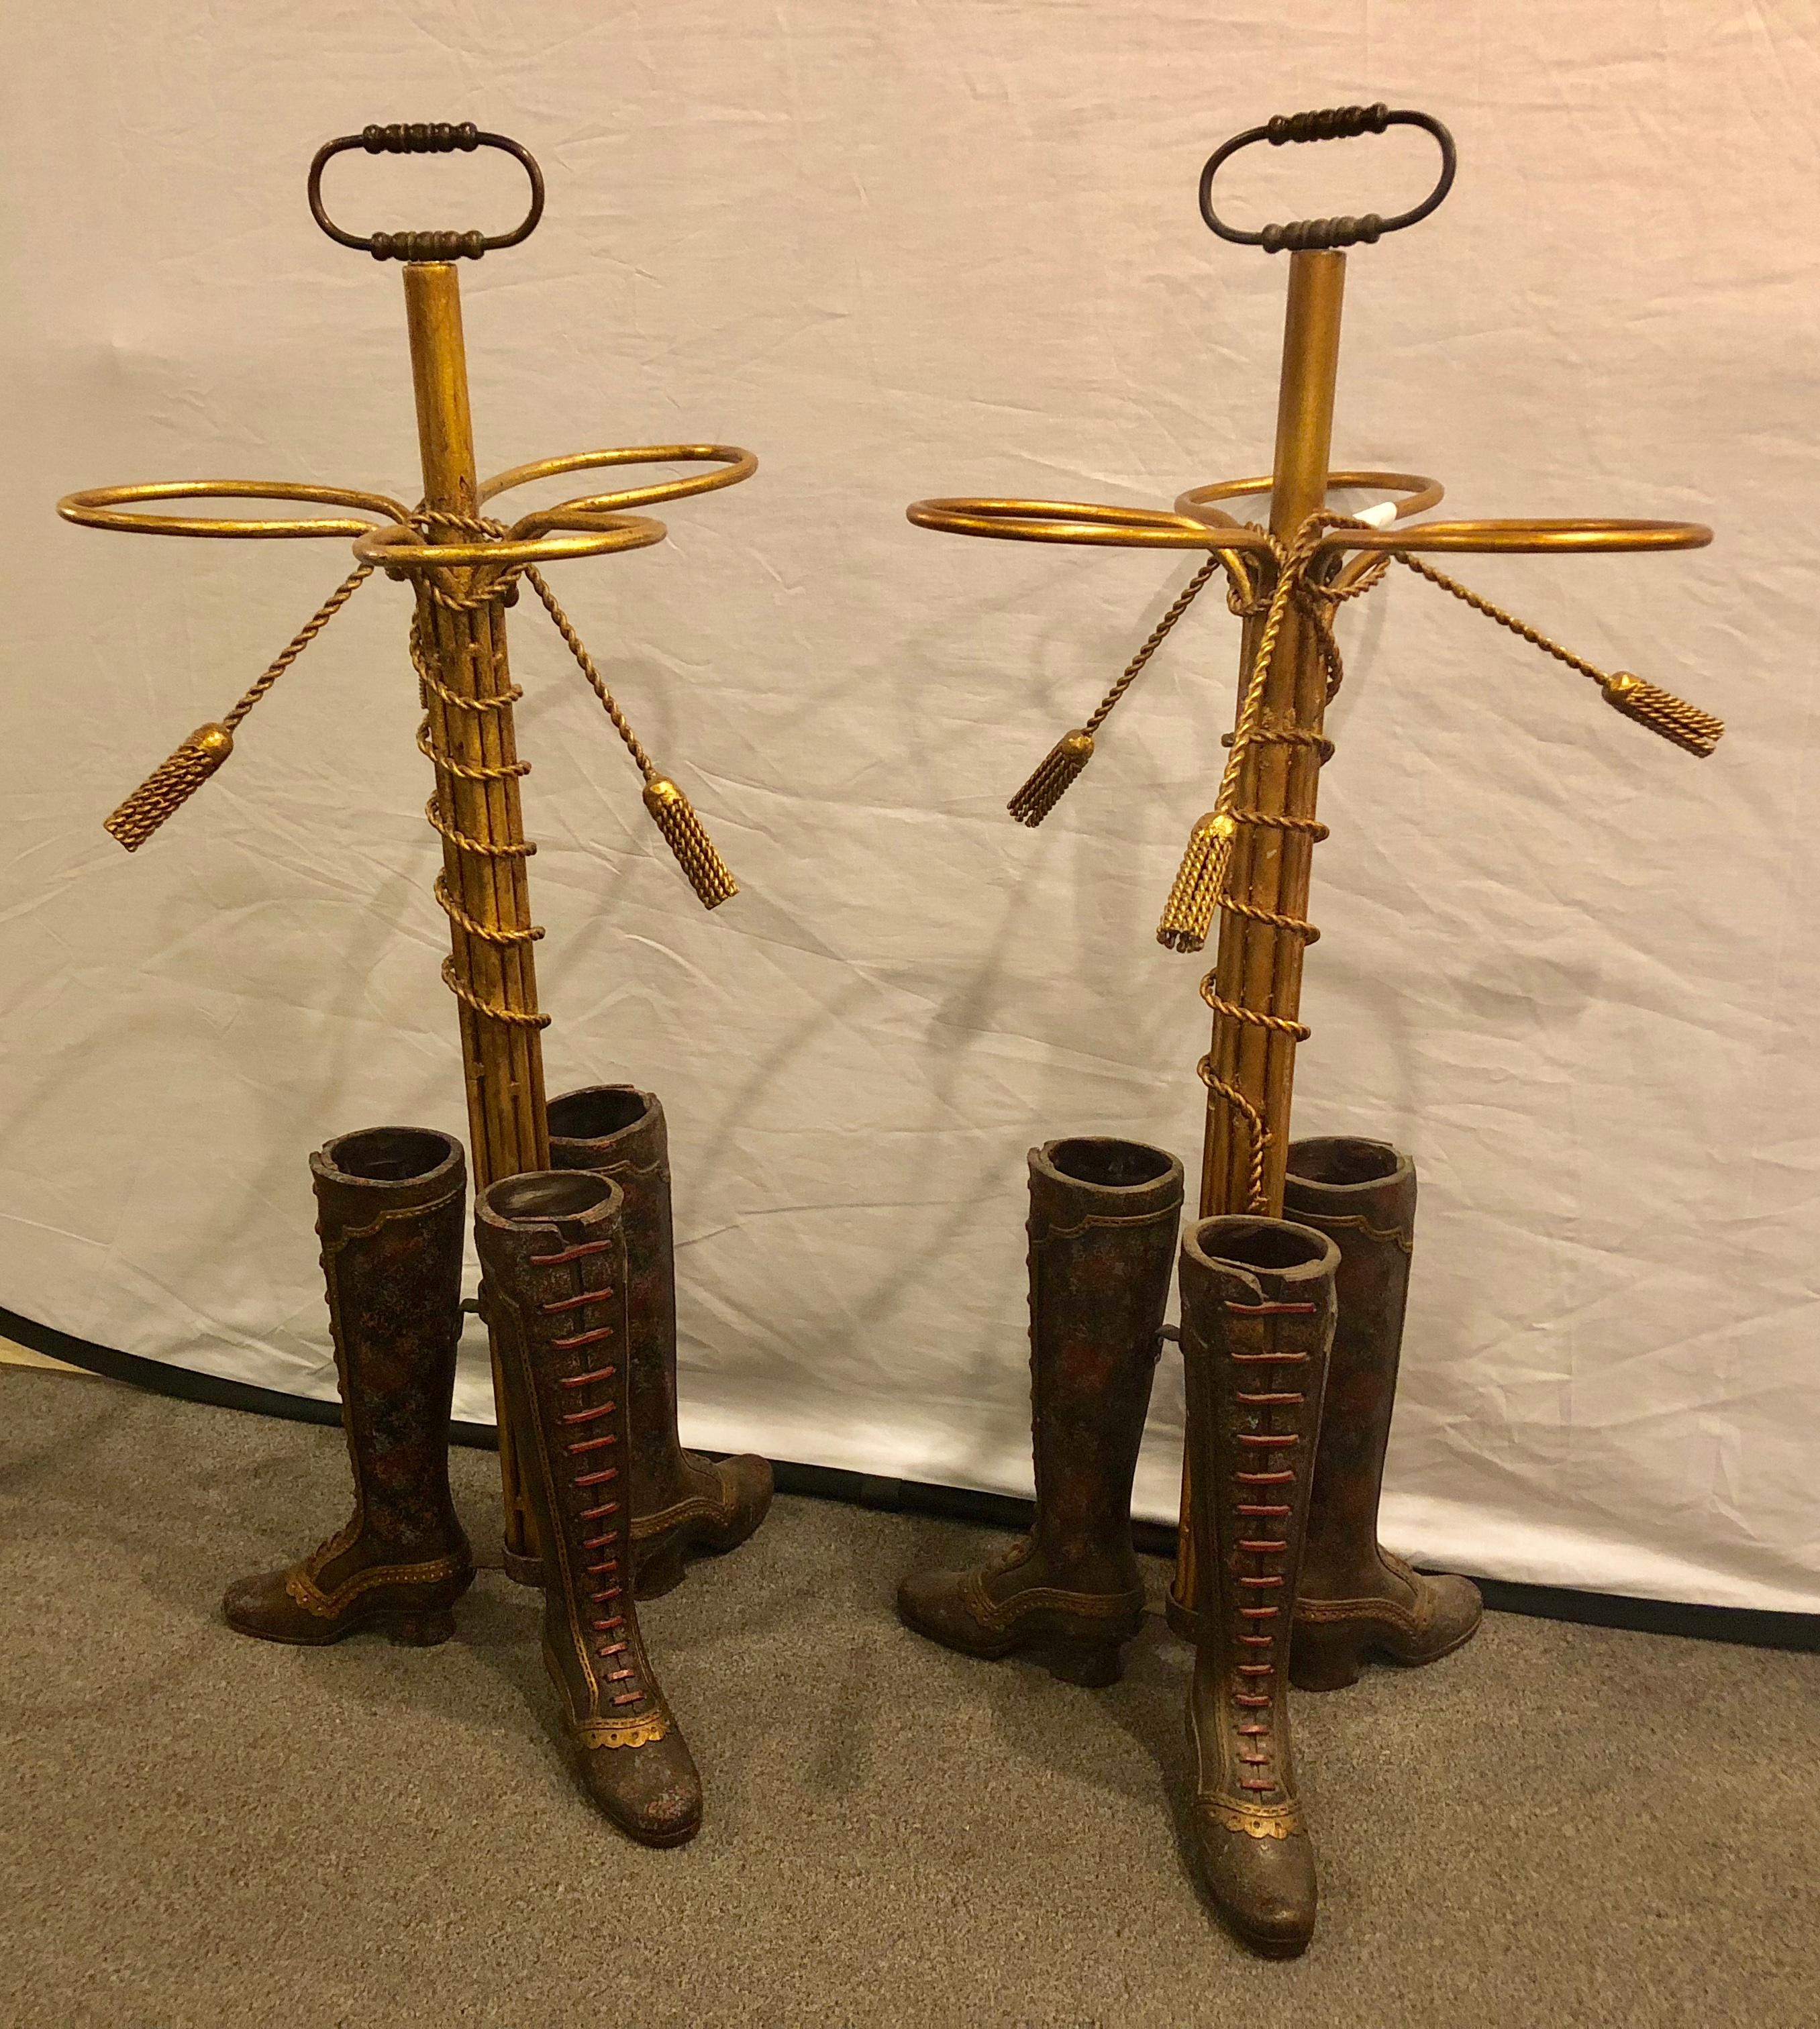 A pair of umbrella stands each depicting painted boots on bronze from base. Priced by the piece. 
